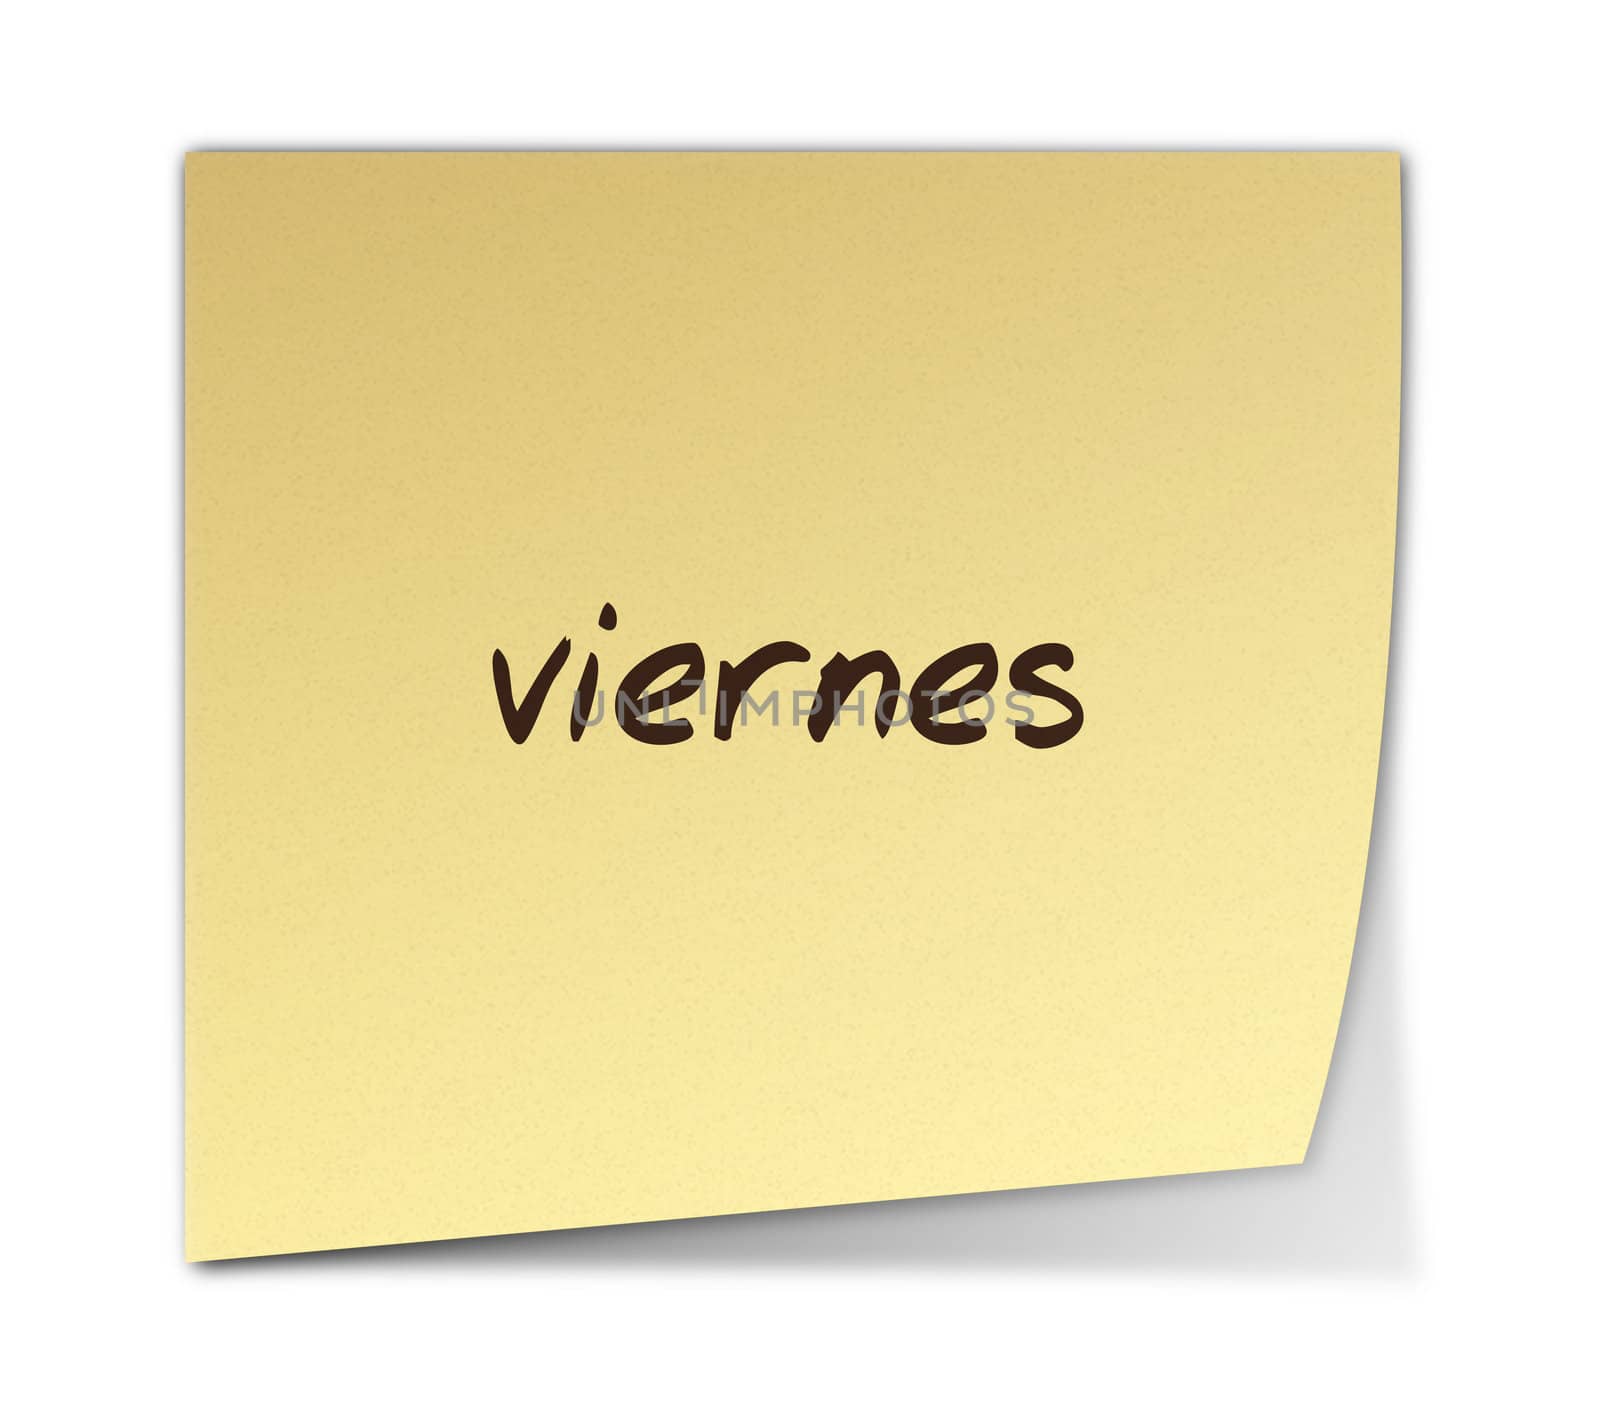 Color Paper Note With Friday Text in Spanish (jpeg file has clipping path)